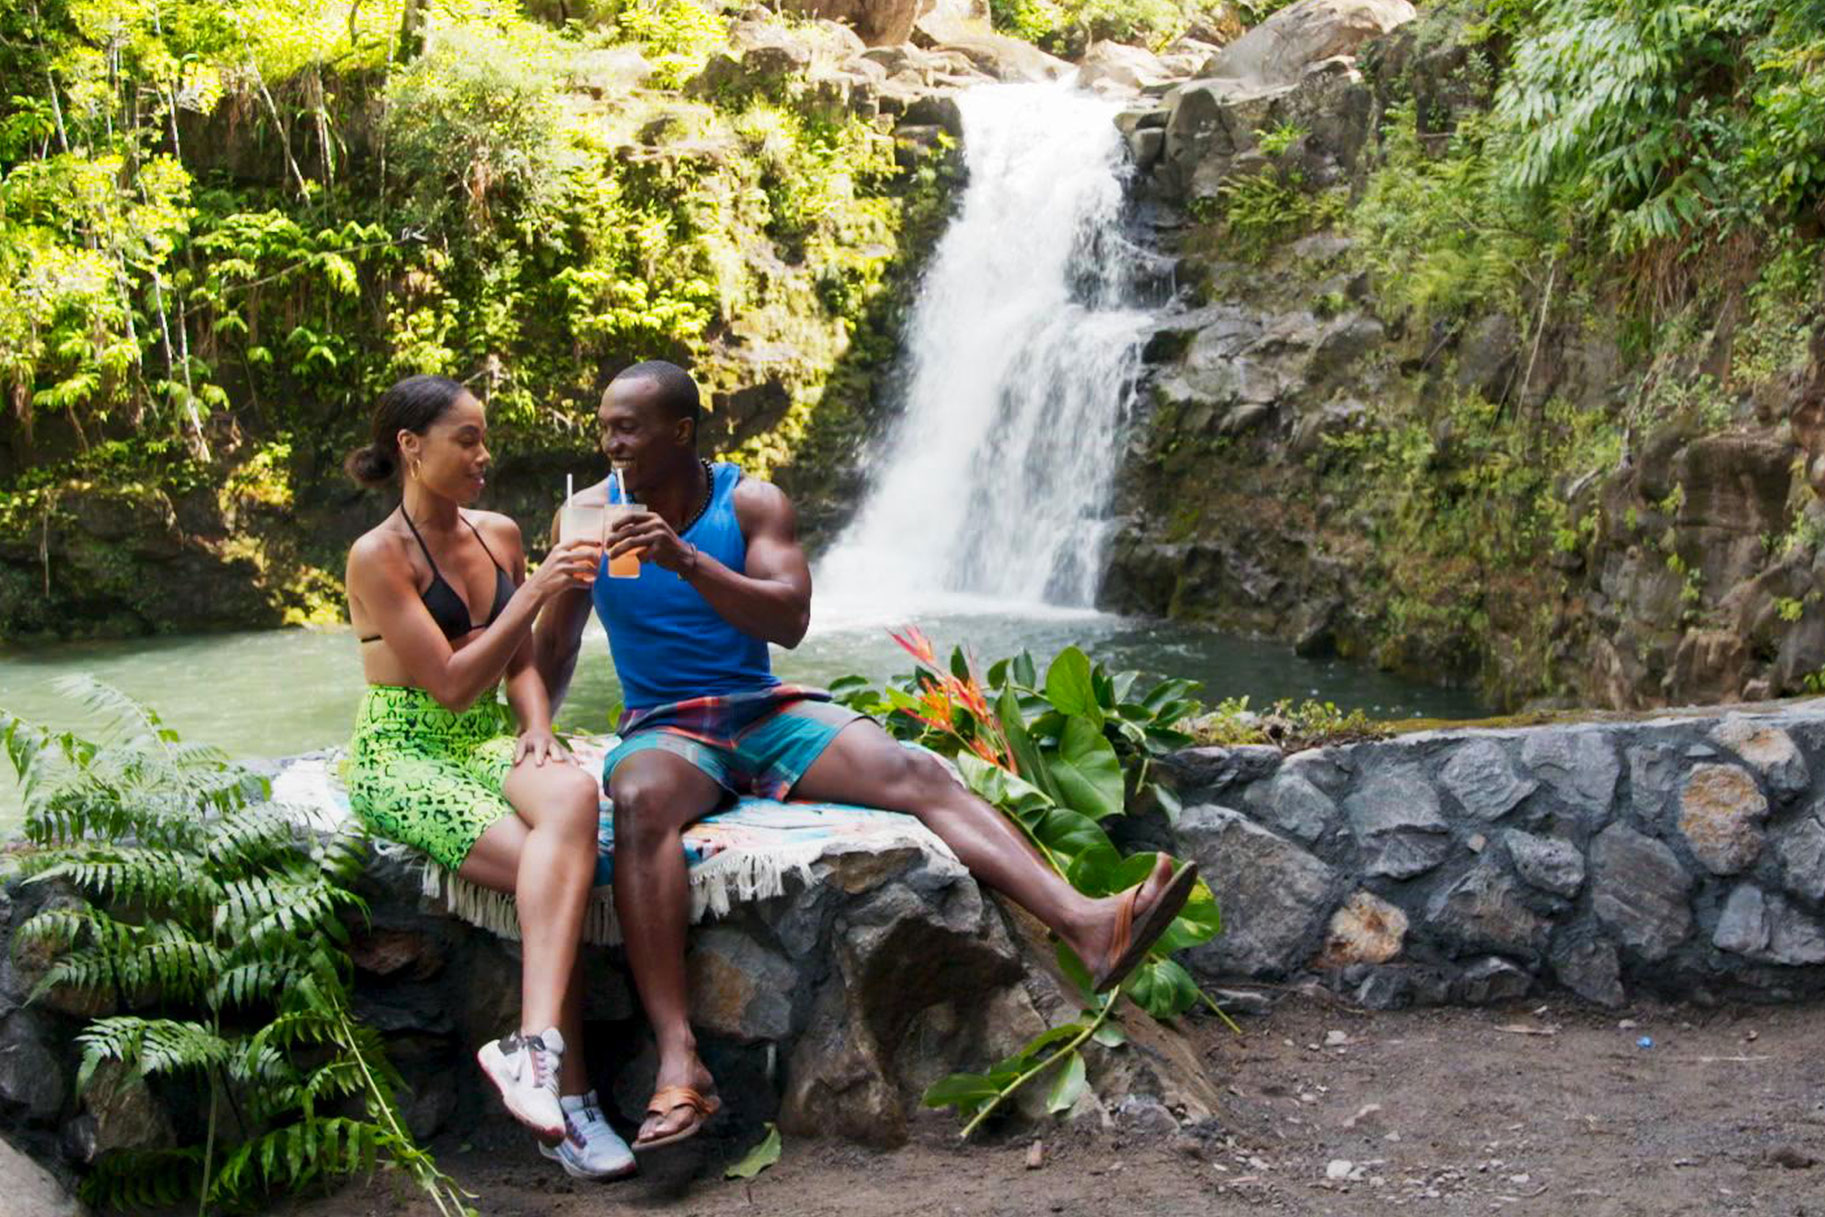 Ashely and Evan on a date, drinking cocktails in front of a waterfall